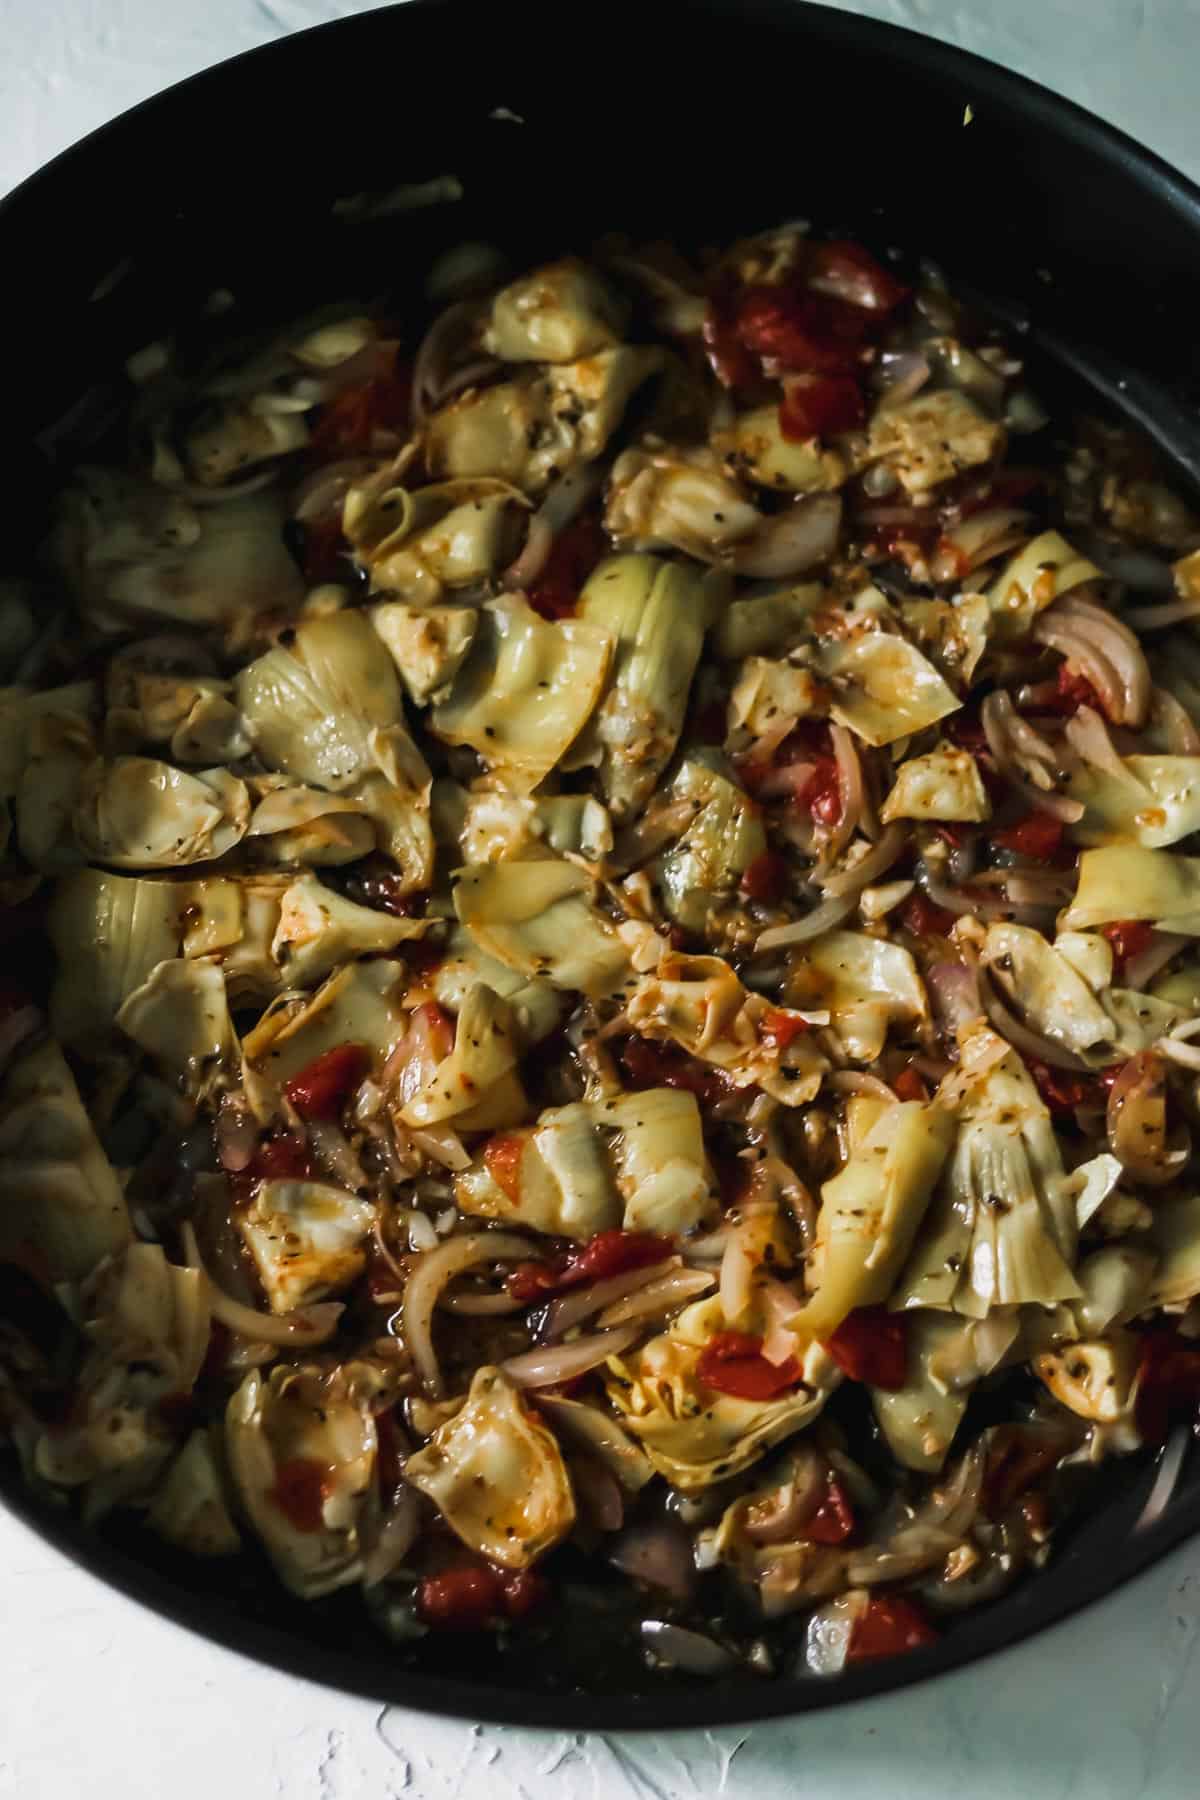 Olive oil, artichokes, garlic, shallots, and tomato in a high sided skillet.